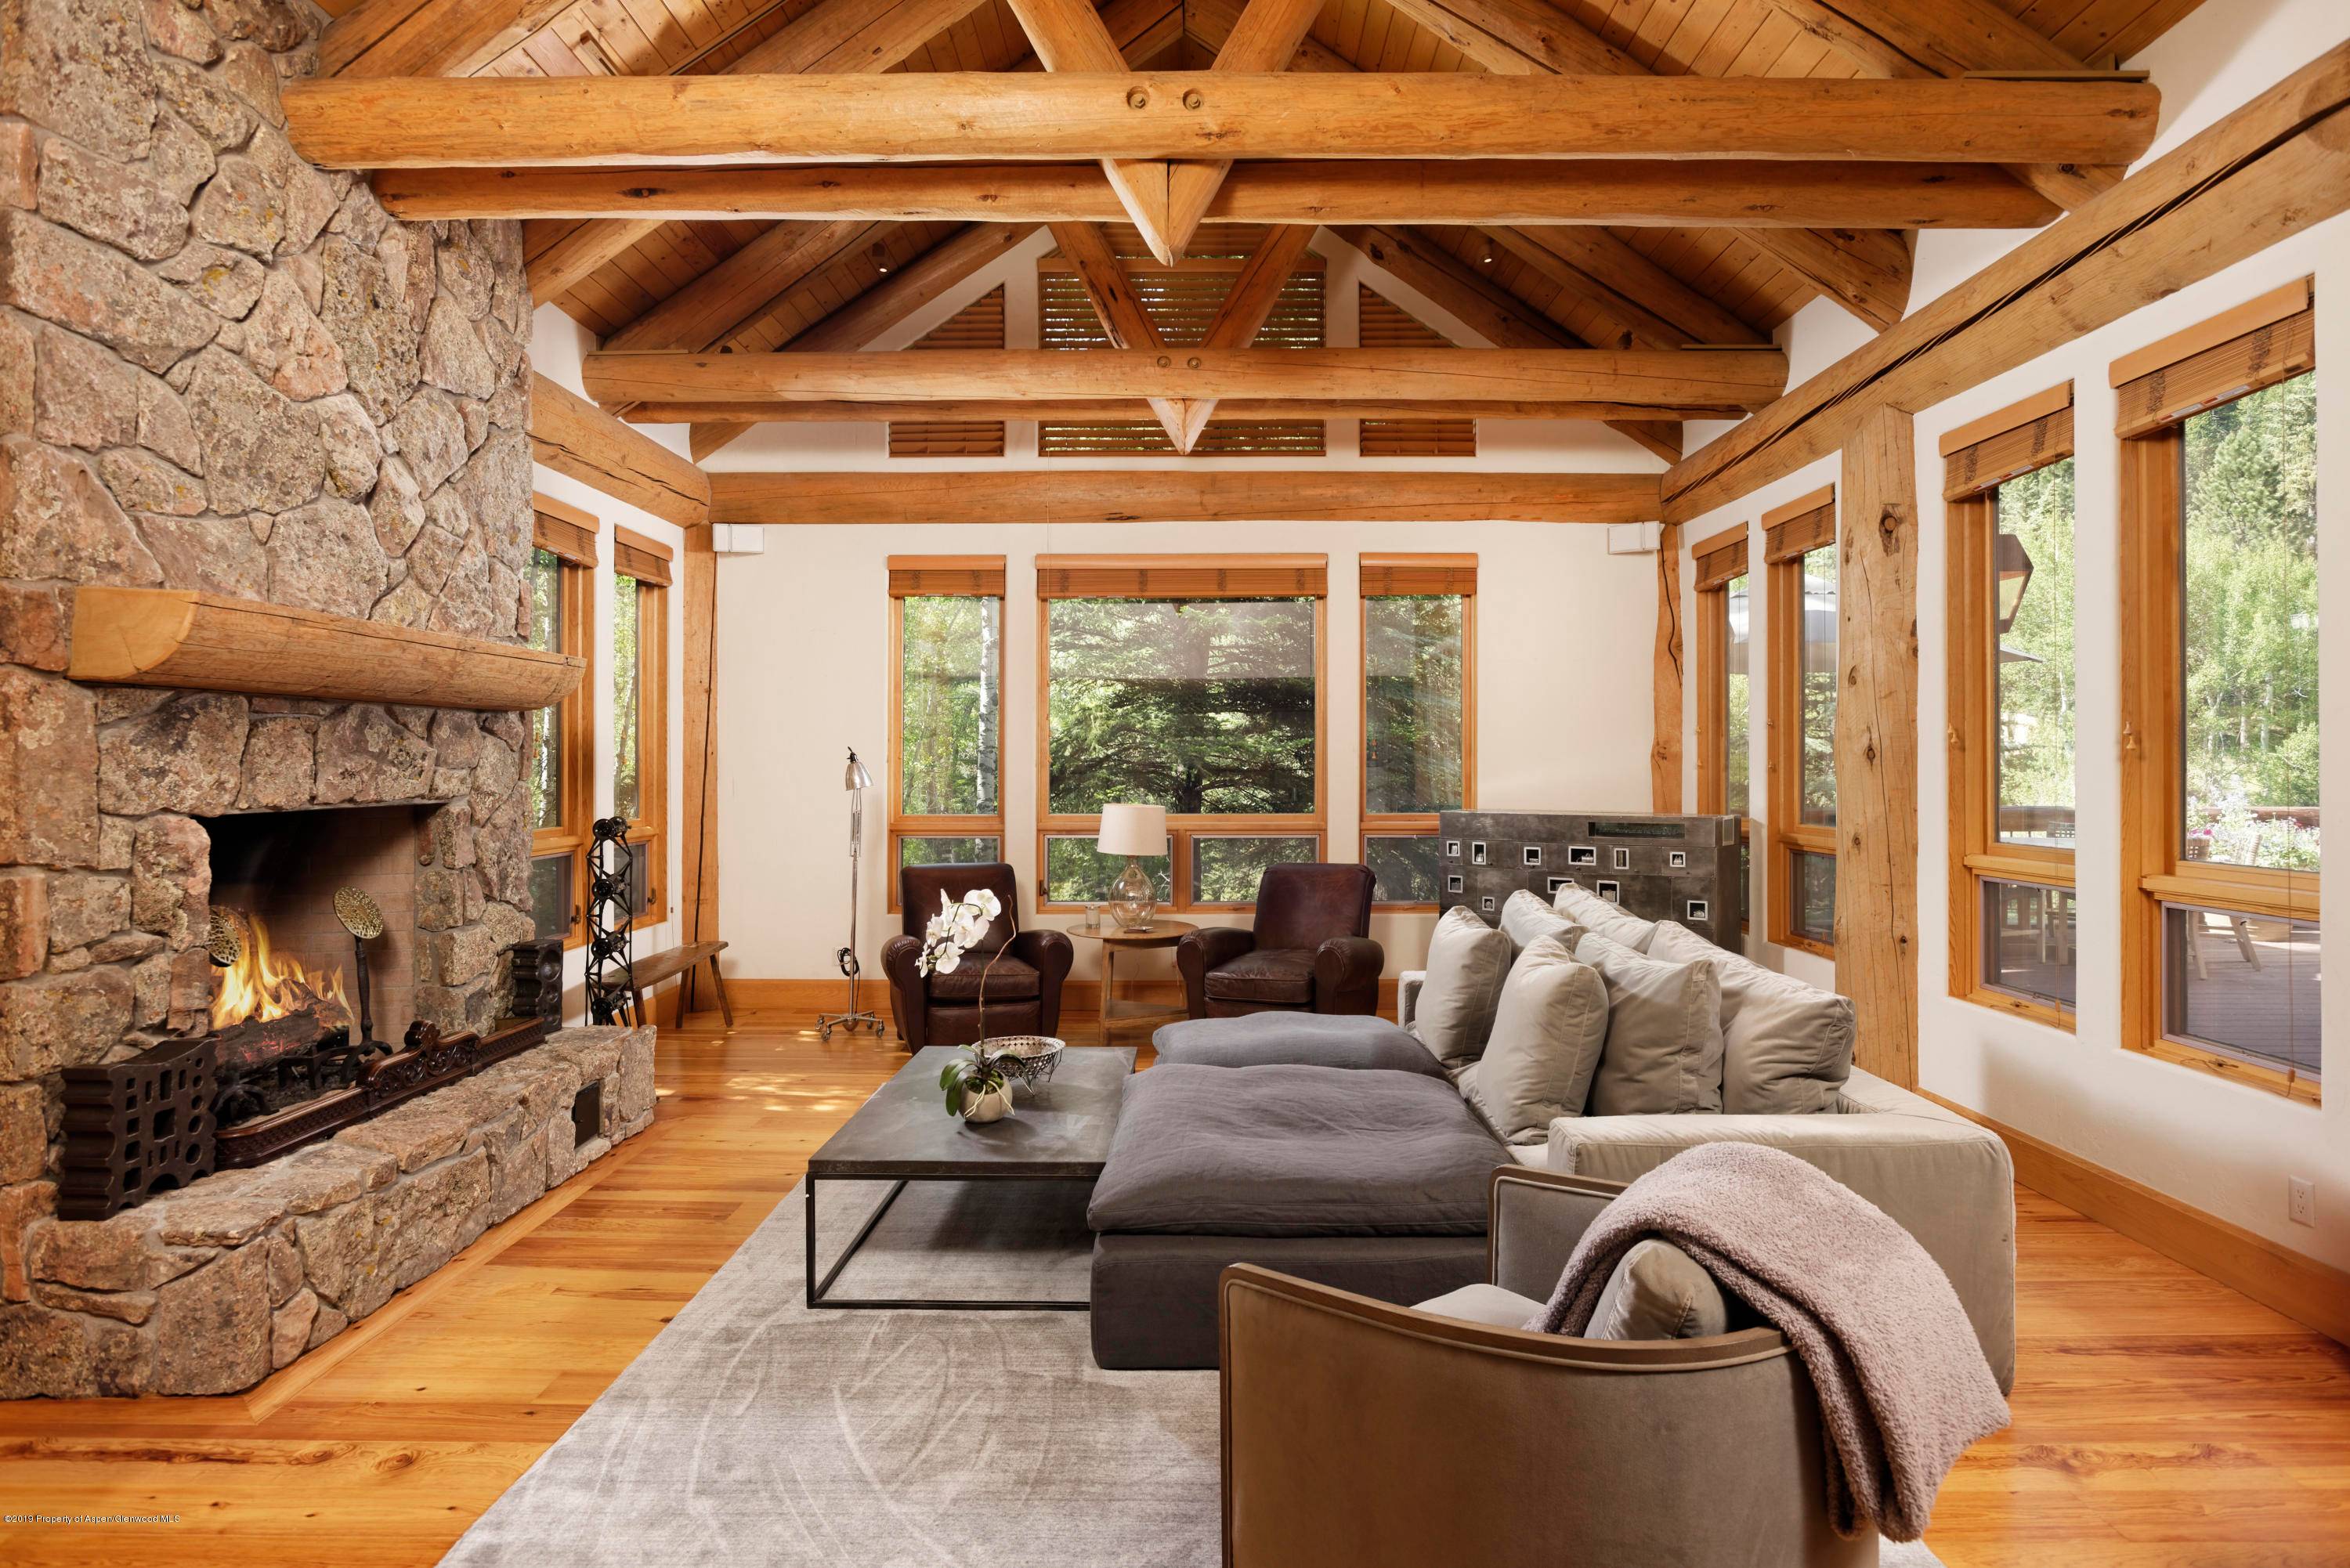 Enjoy an impeccably maintained 5 bedroom property that sits on the edge of the Roaring Fork River just outside of the Aspen core.